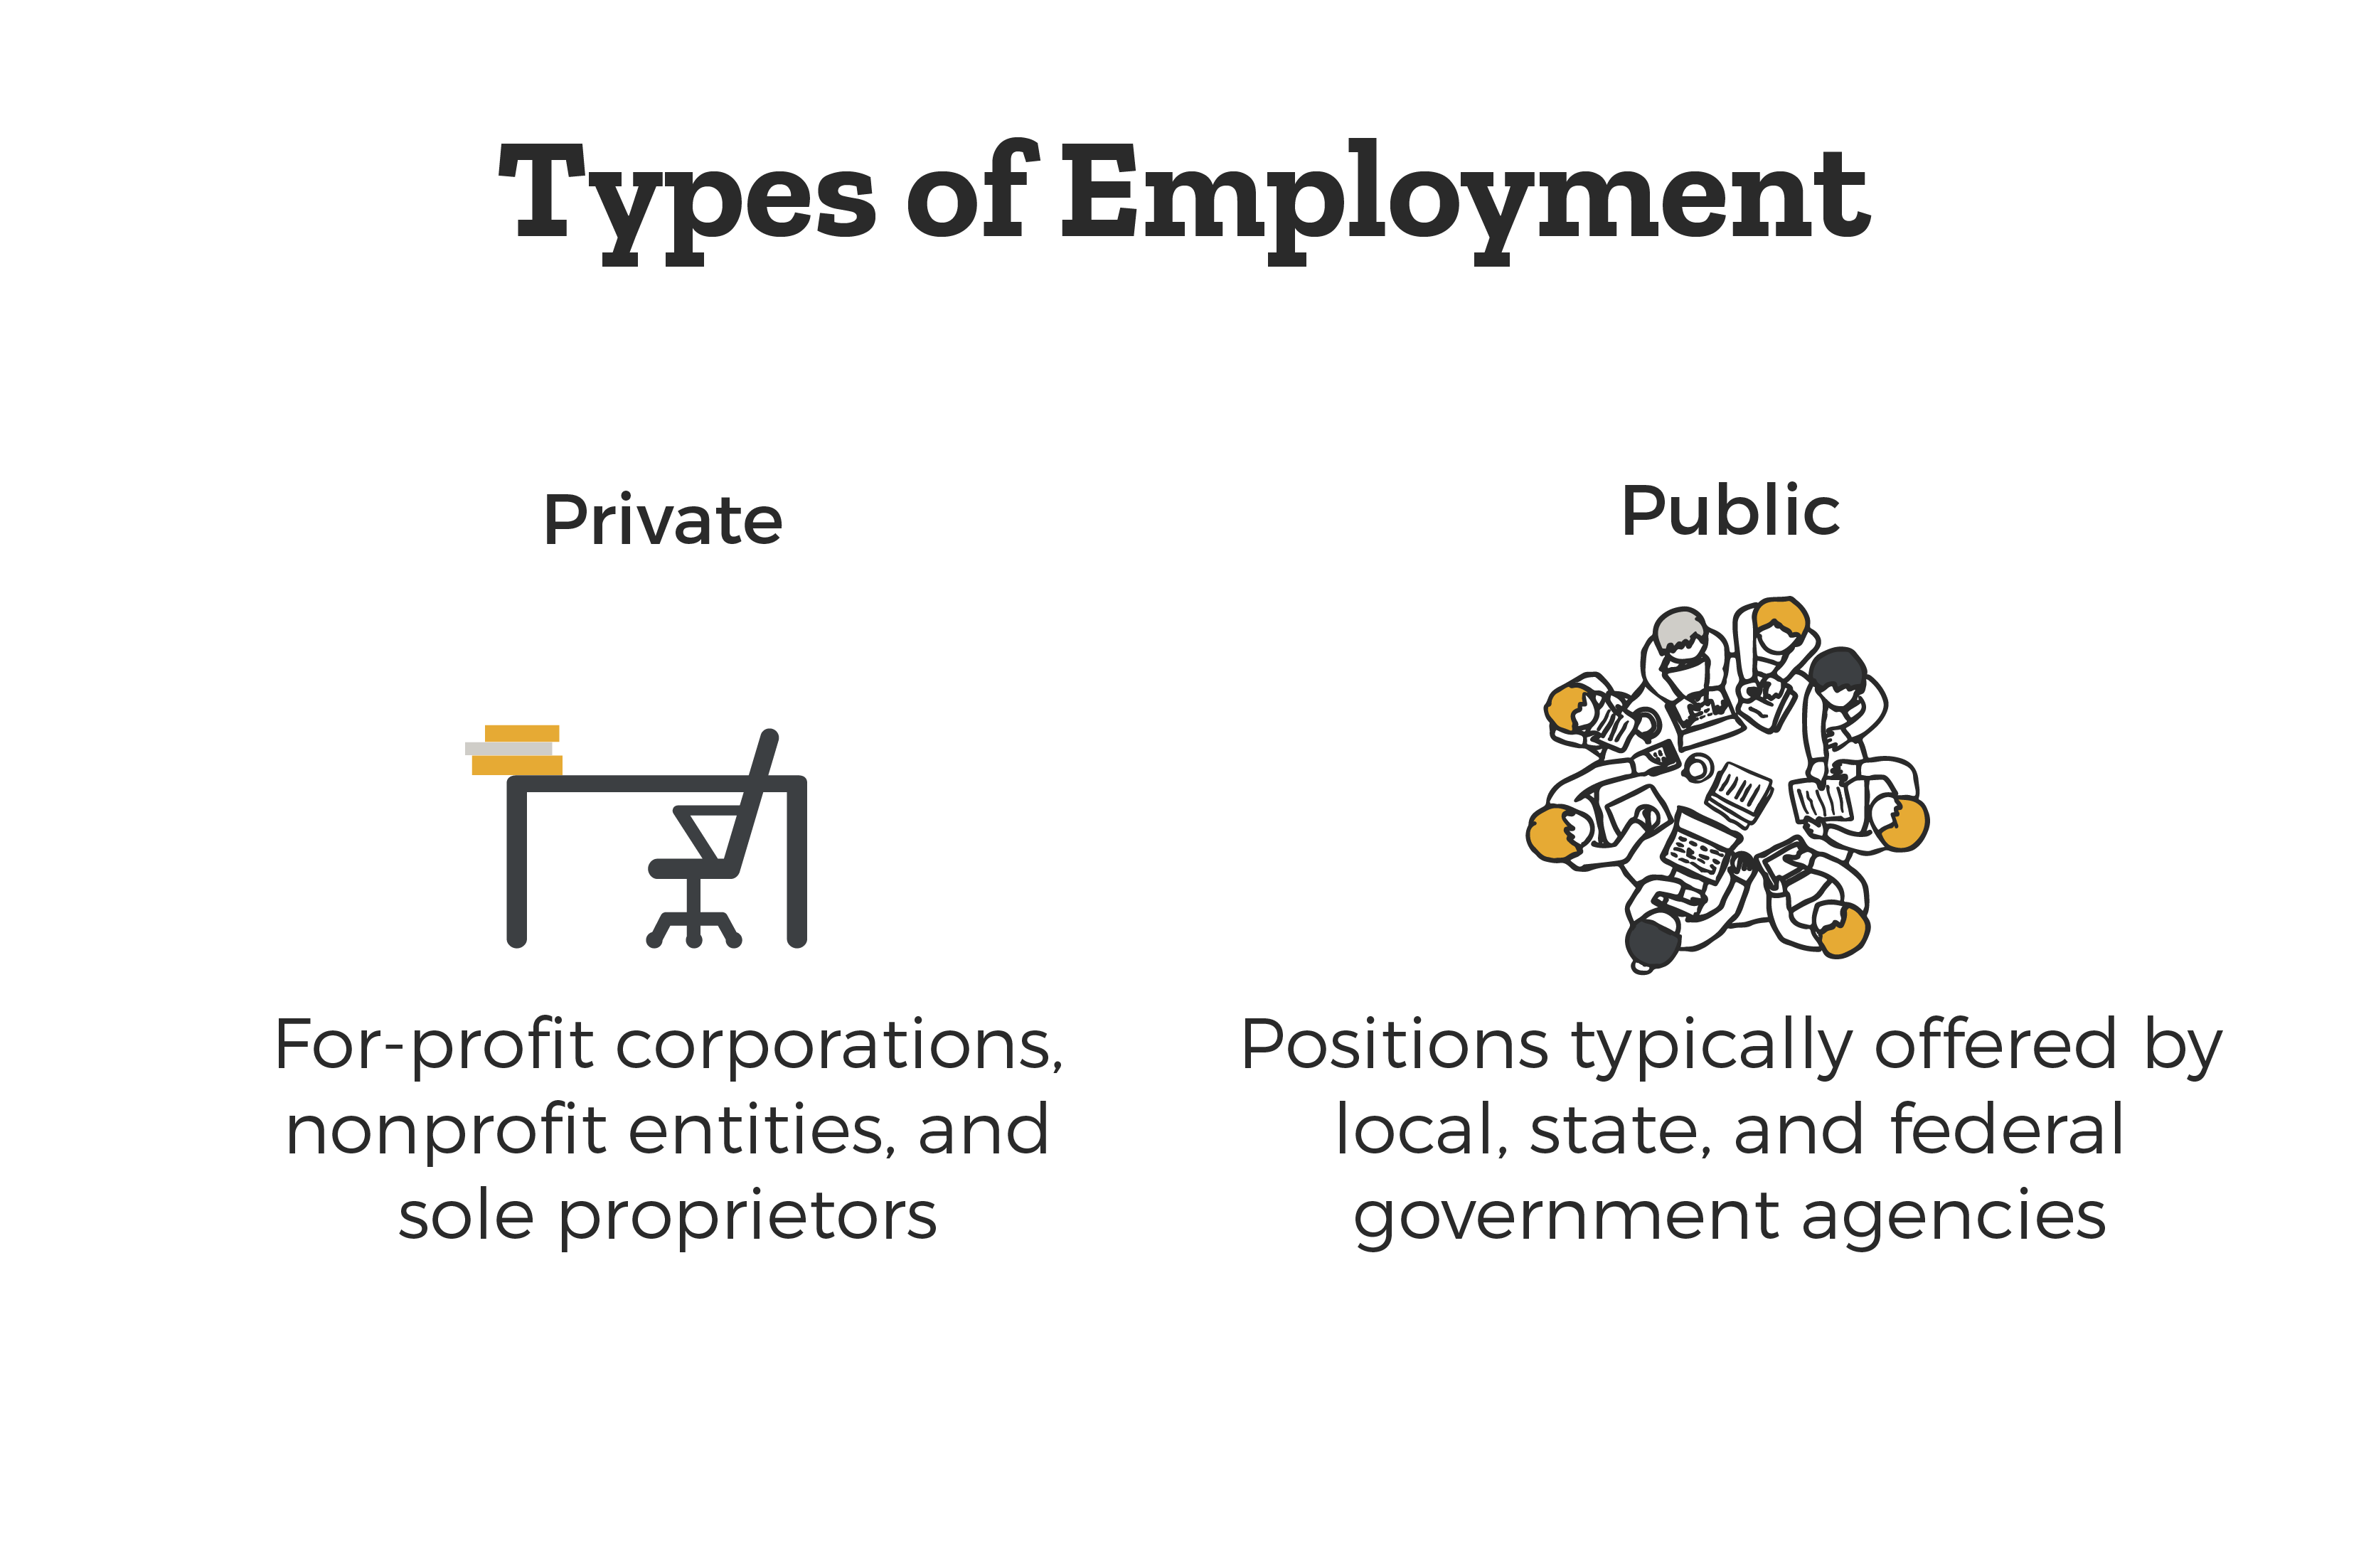 Two Types of Employment - Private Employment meaning for-profit corporations, non profit entities, and sole proprietors. And Public Employment meaning positions typically offered by local, state, and federal government agencies.